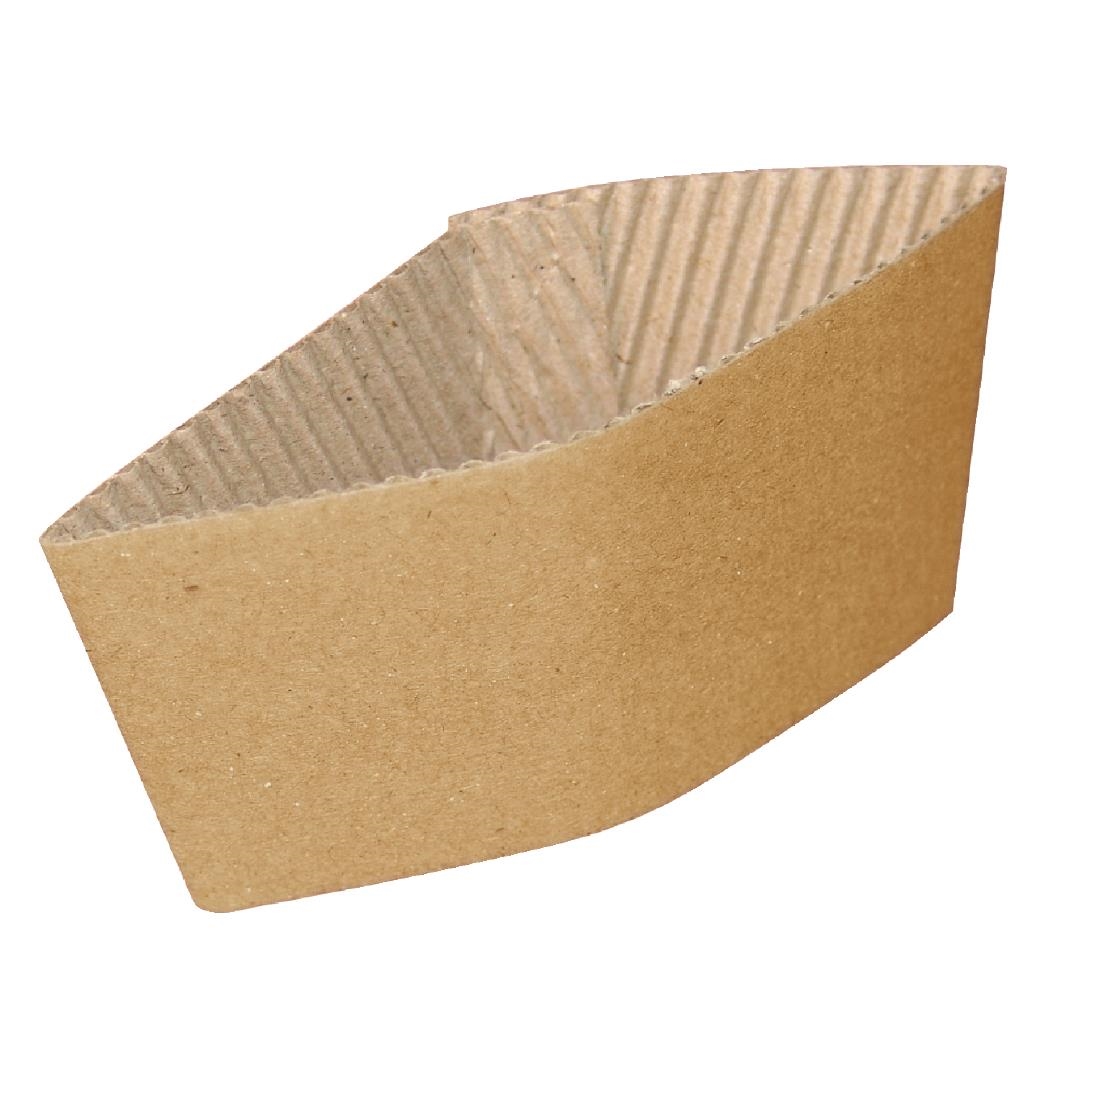 Corrugated Cup Sleeves for 12/16oz Cups (Pack of 1000)